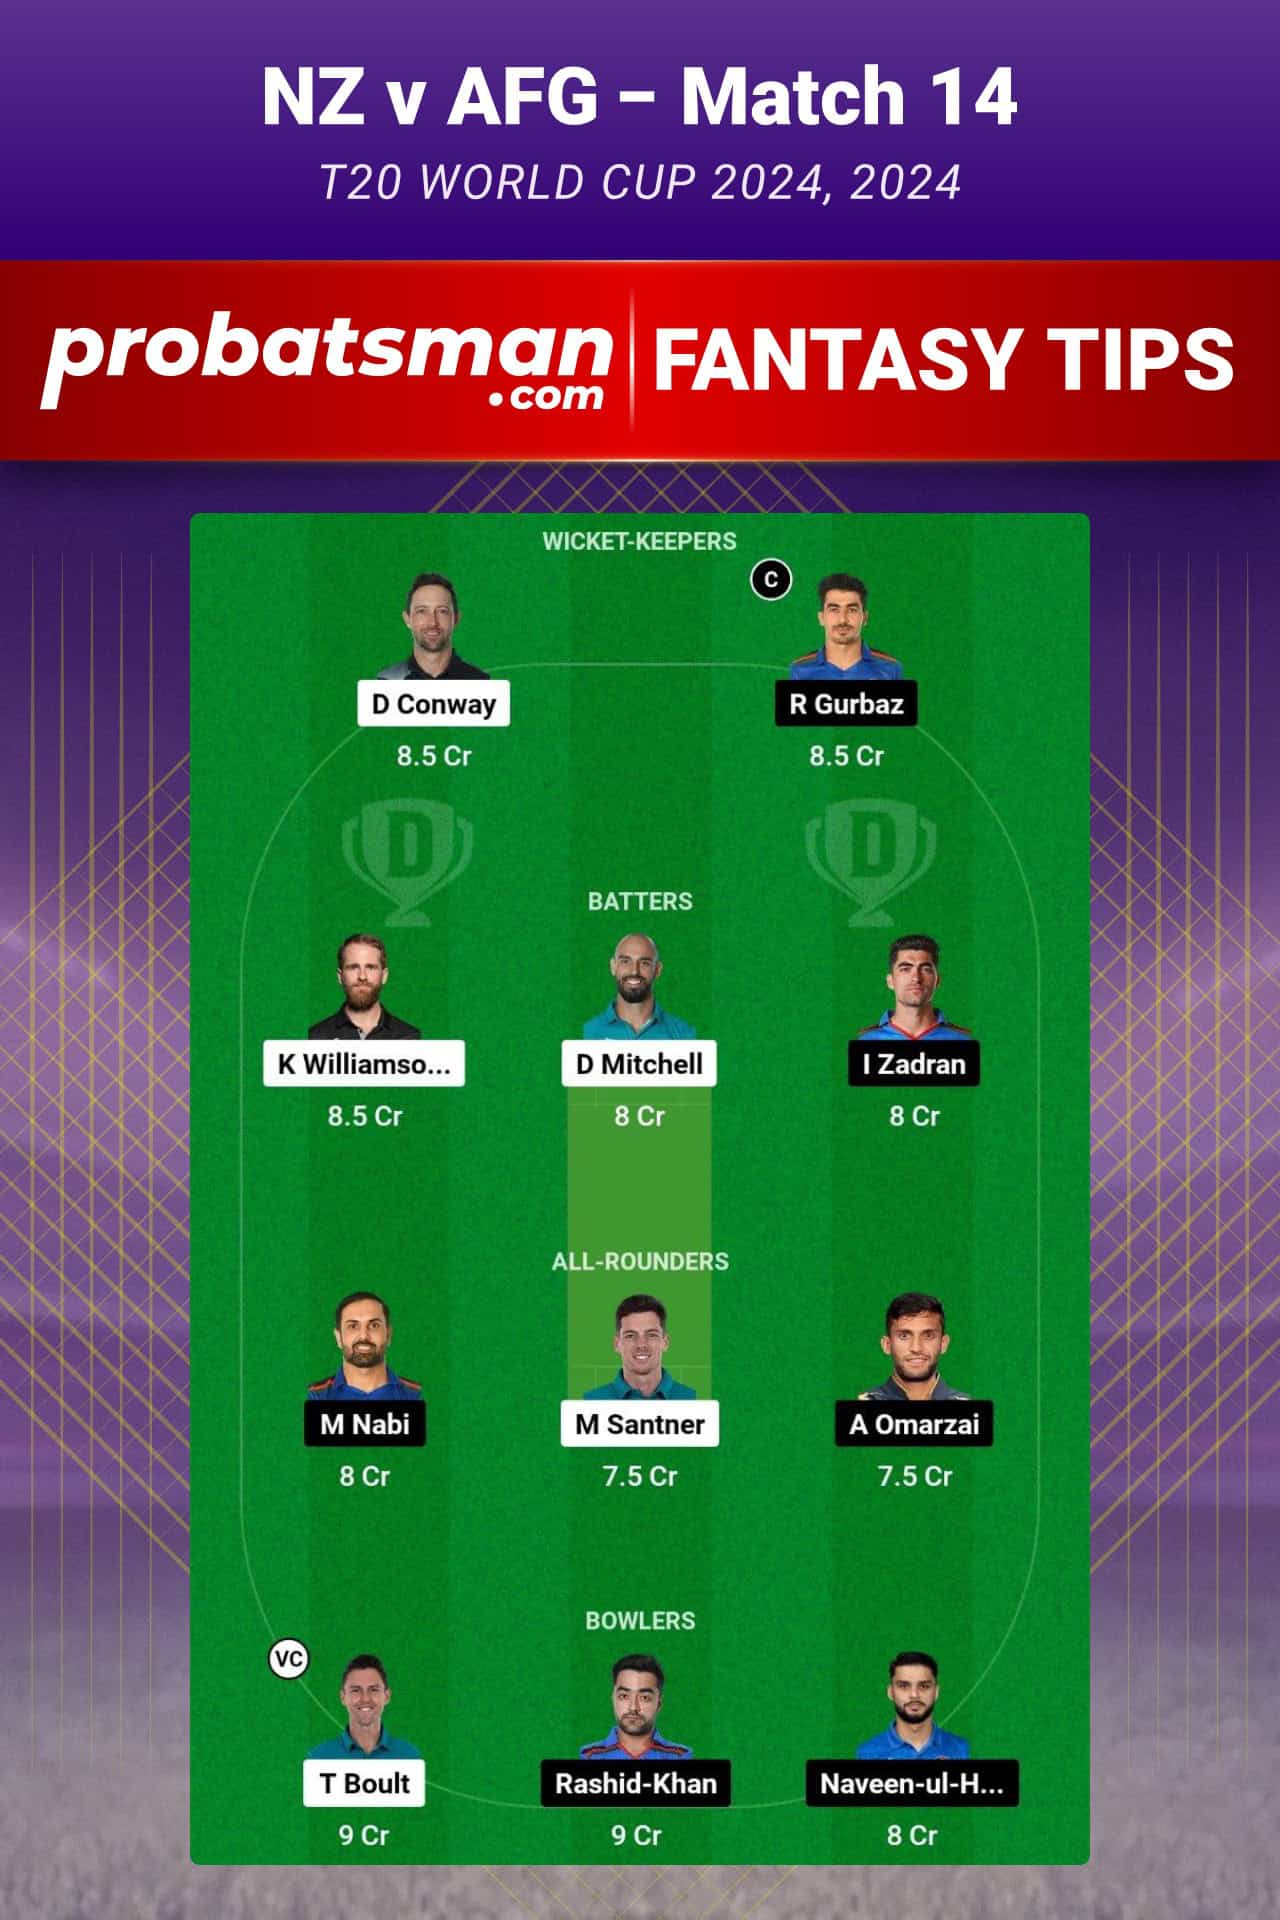 NZ vs AFG Dream11 Prediction For Match 14 of T20 World Cup 2024